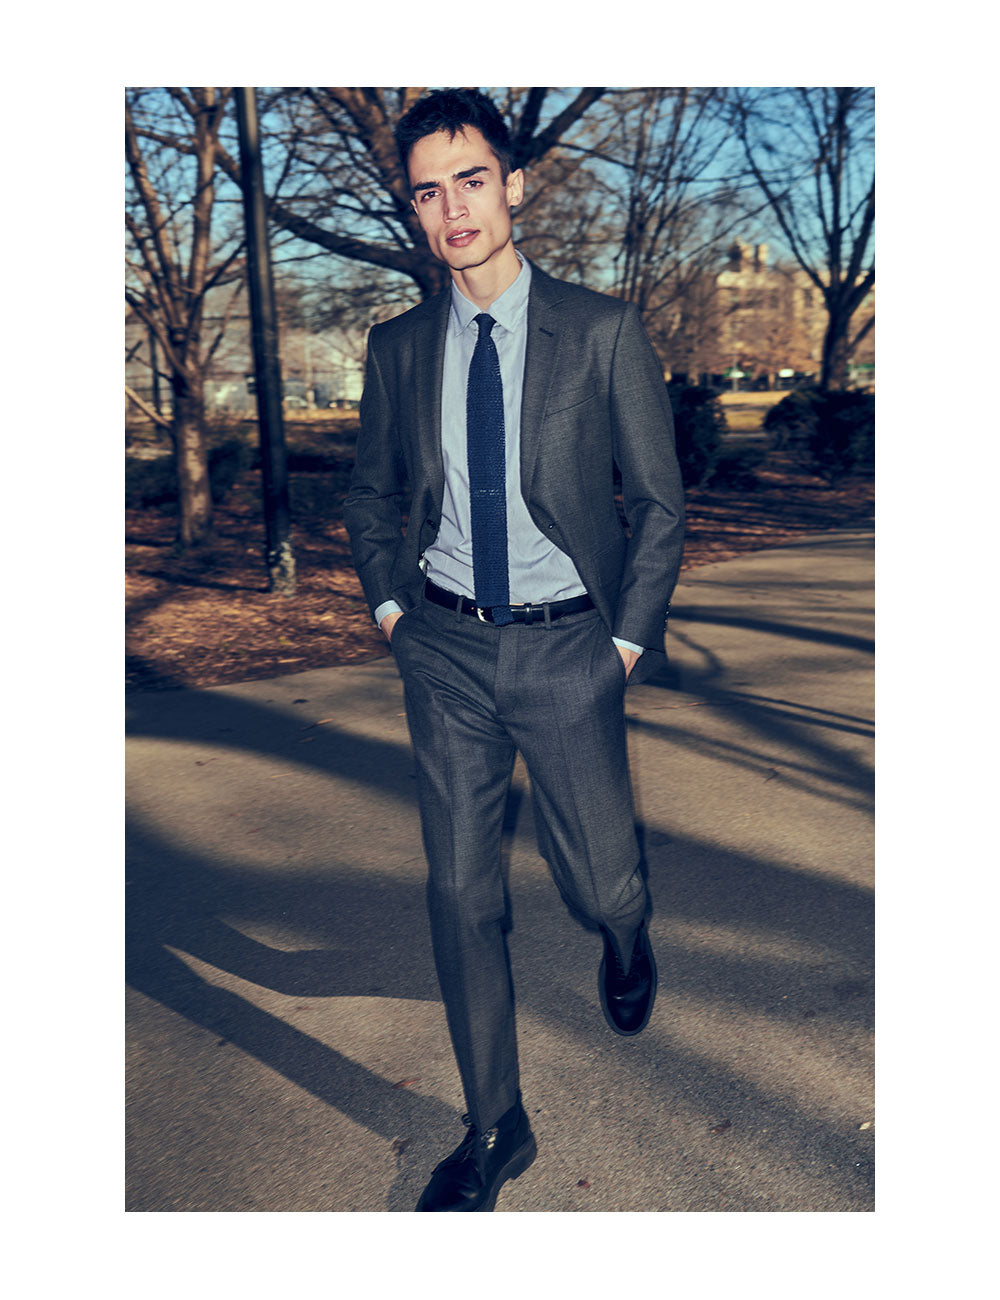 Model wearing charcoal suit, light blue dress shirt, and blue knit tie walking through a NYC park.